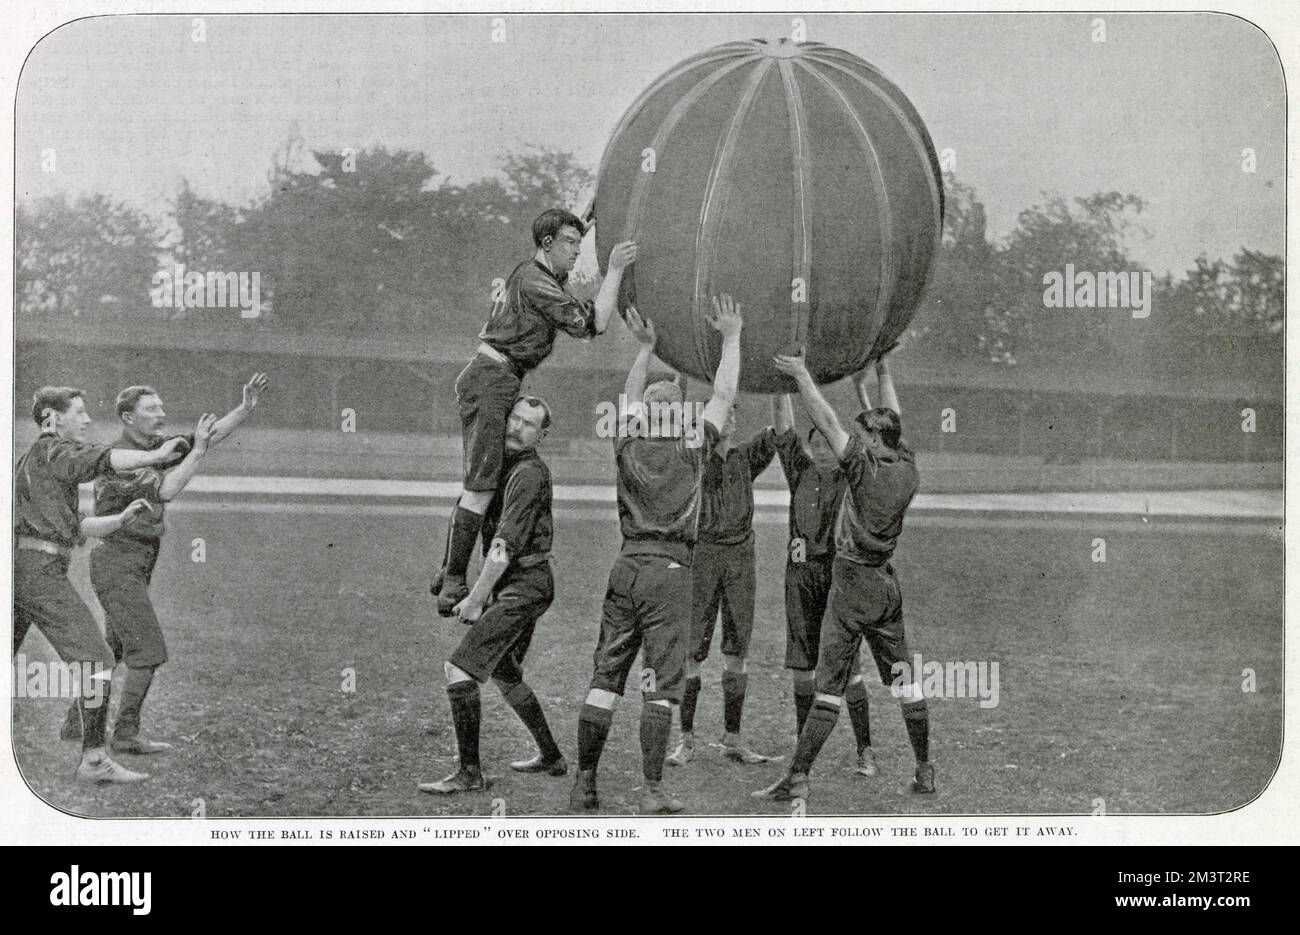 A game of 'pushball' between Anerley and Crystal Palace at the Crystal Palace sports ground. This match, one of the first played in Britain of this American game, was won by Anerley by 1 goal and 3 tries. Photograph showing the ball raised and 'lipped' over opposing side, the two men on the left follow the ball to get it away. Stock Photo